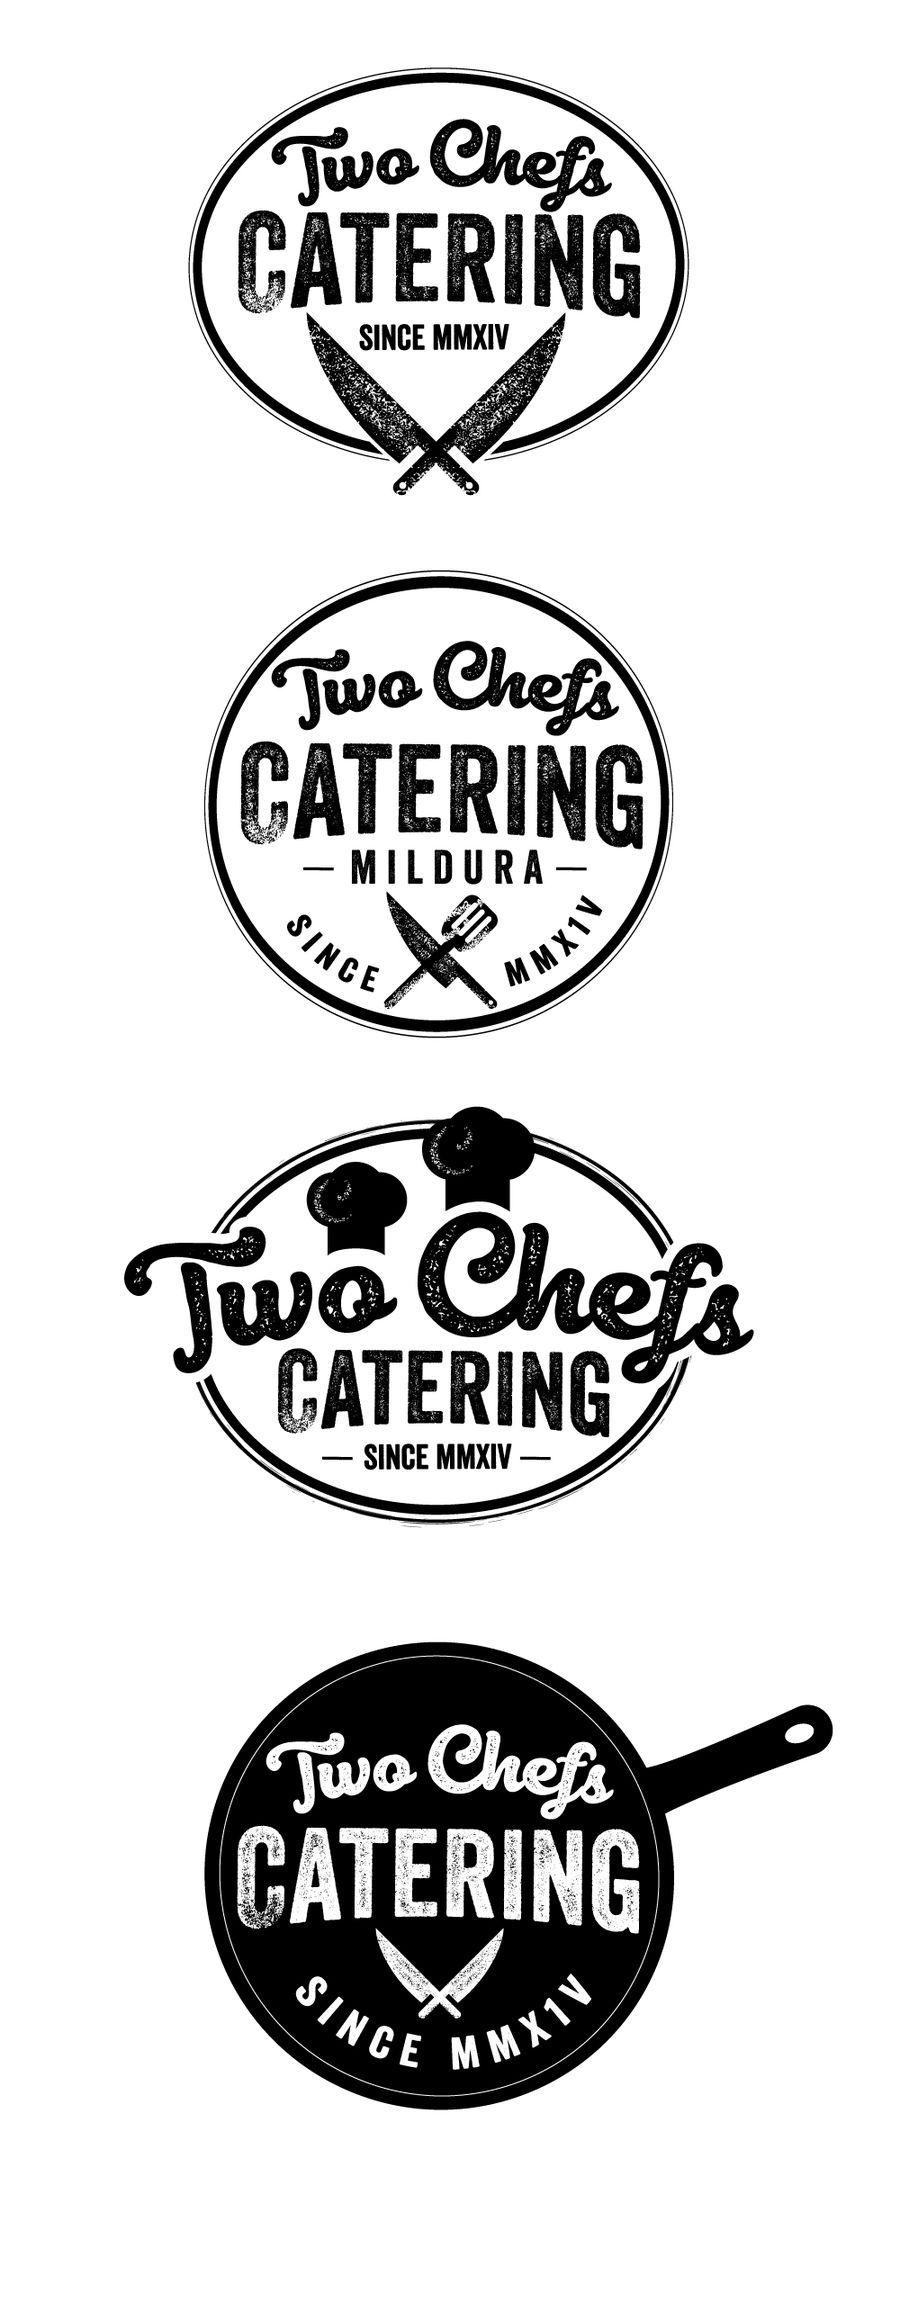 Mmxiv Logo - Design a new logo for catering business